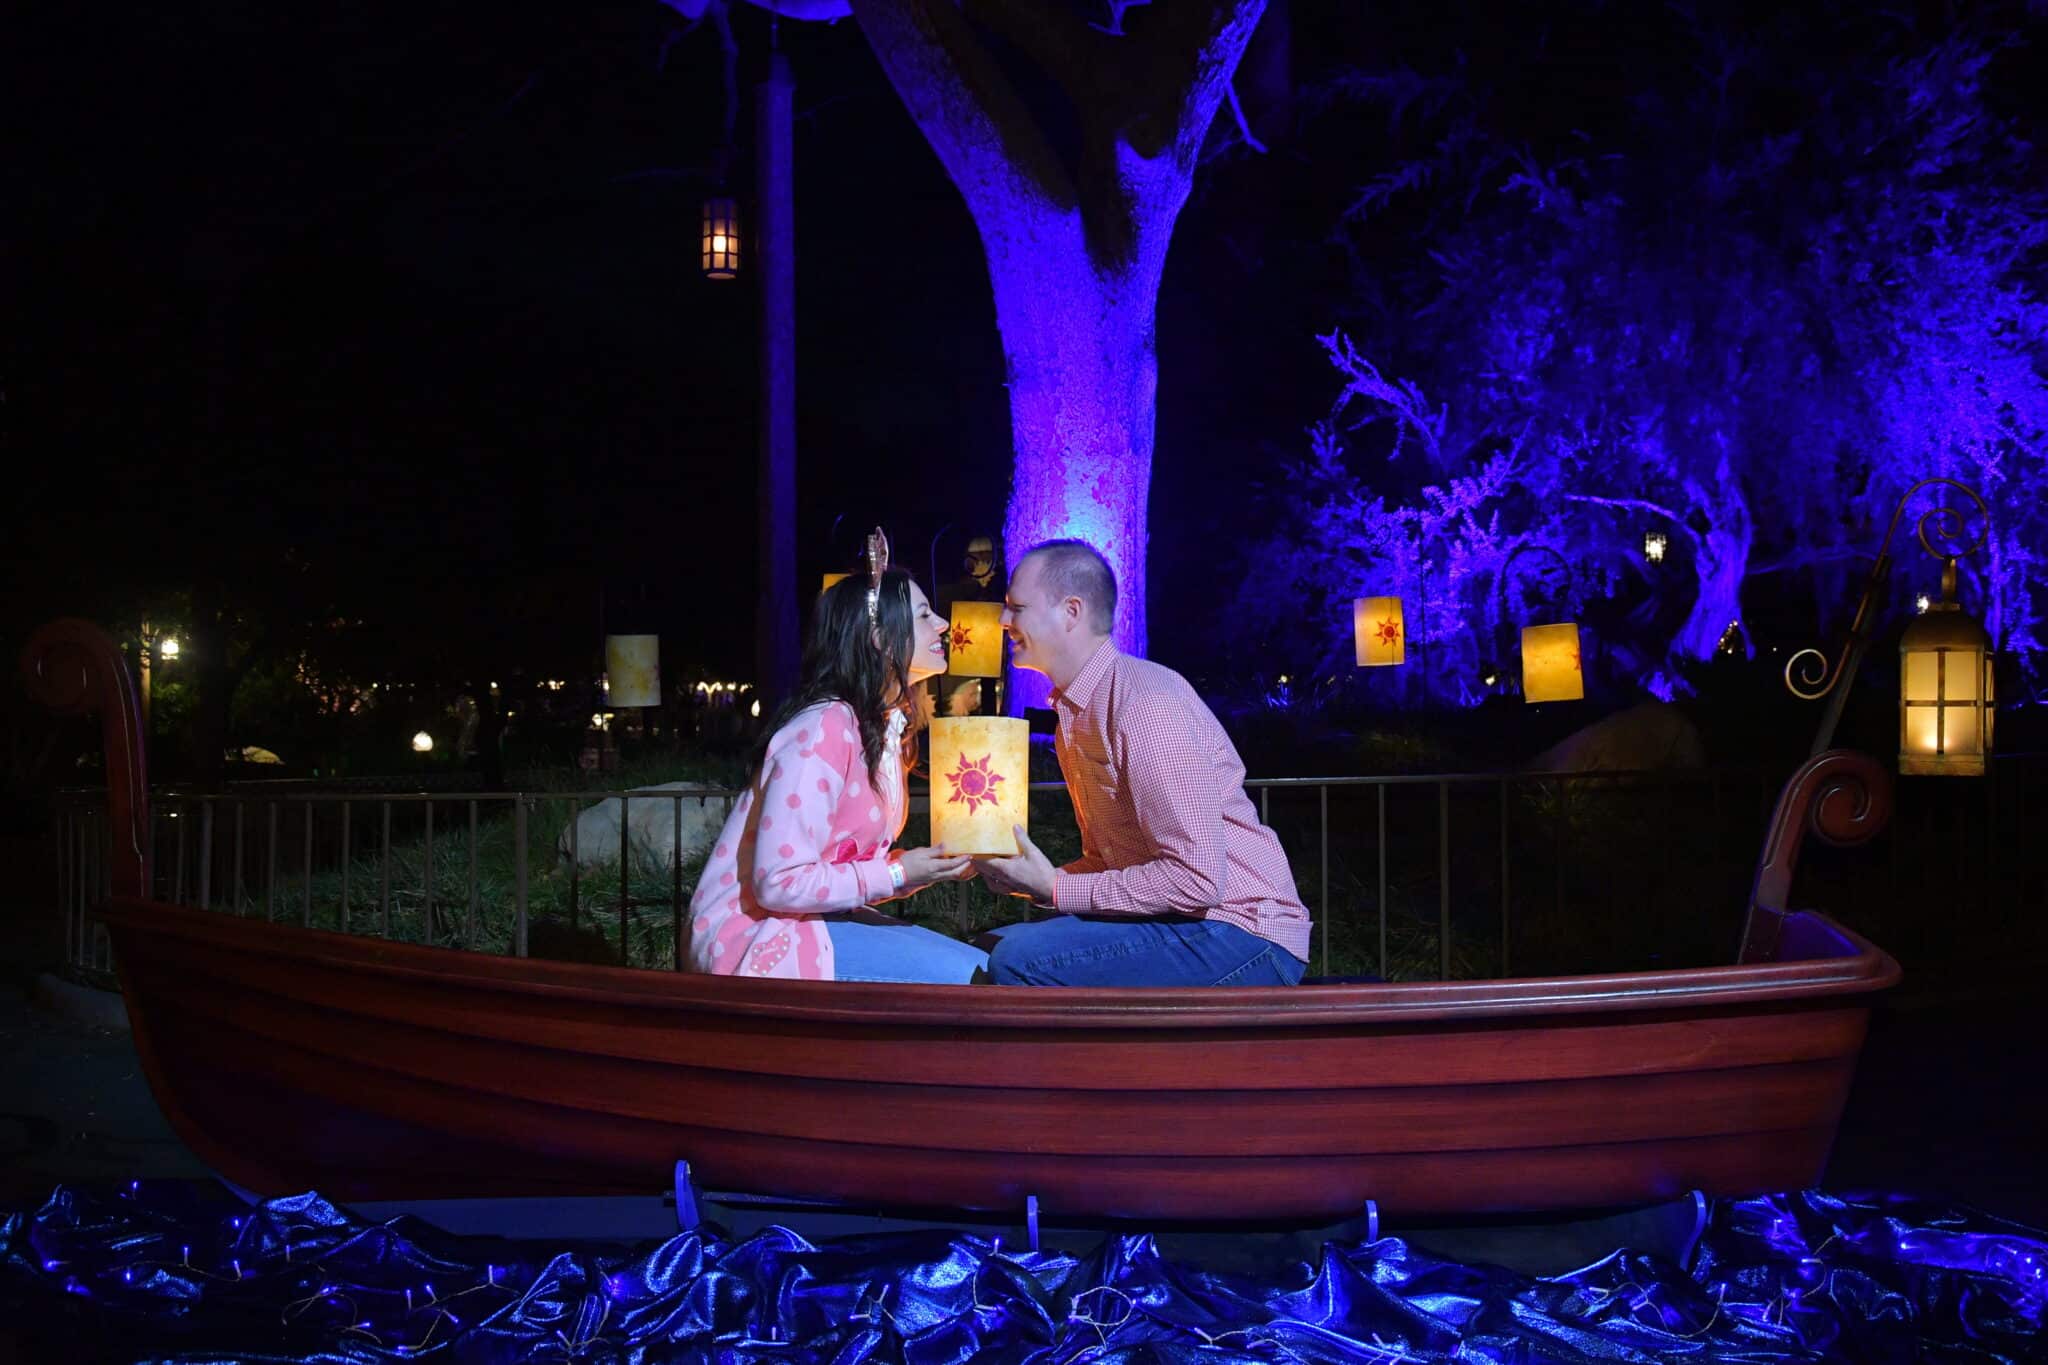 Disneyland After Dark Sweetheart's Nite photo op Tangled step into the scene photo example. 